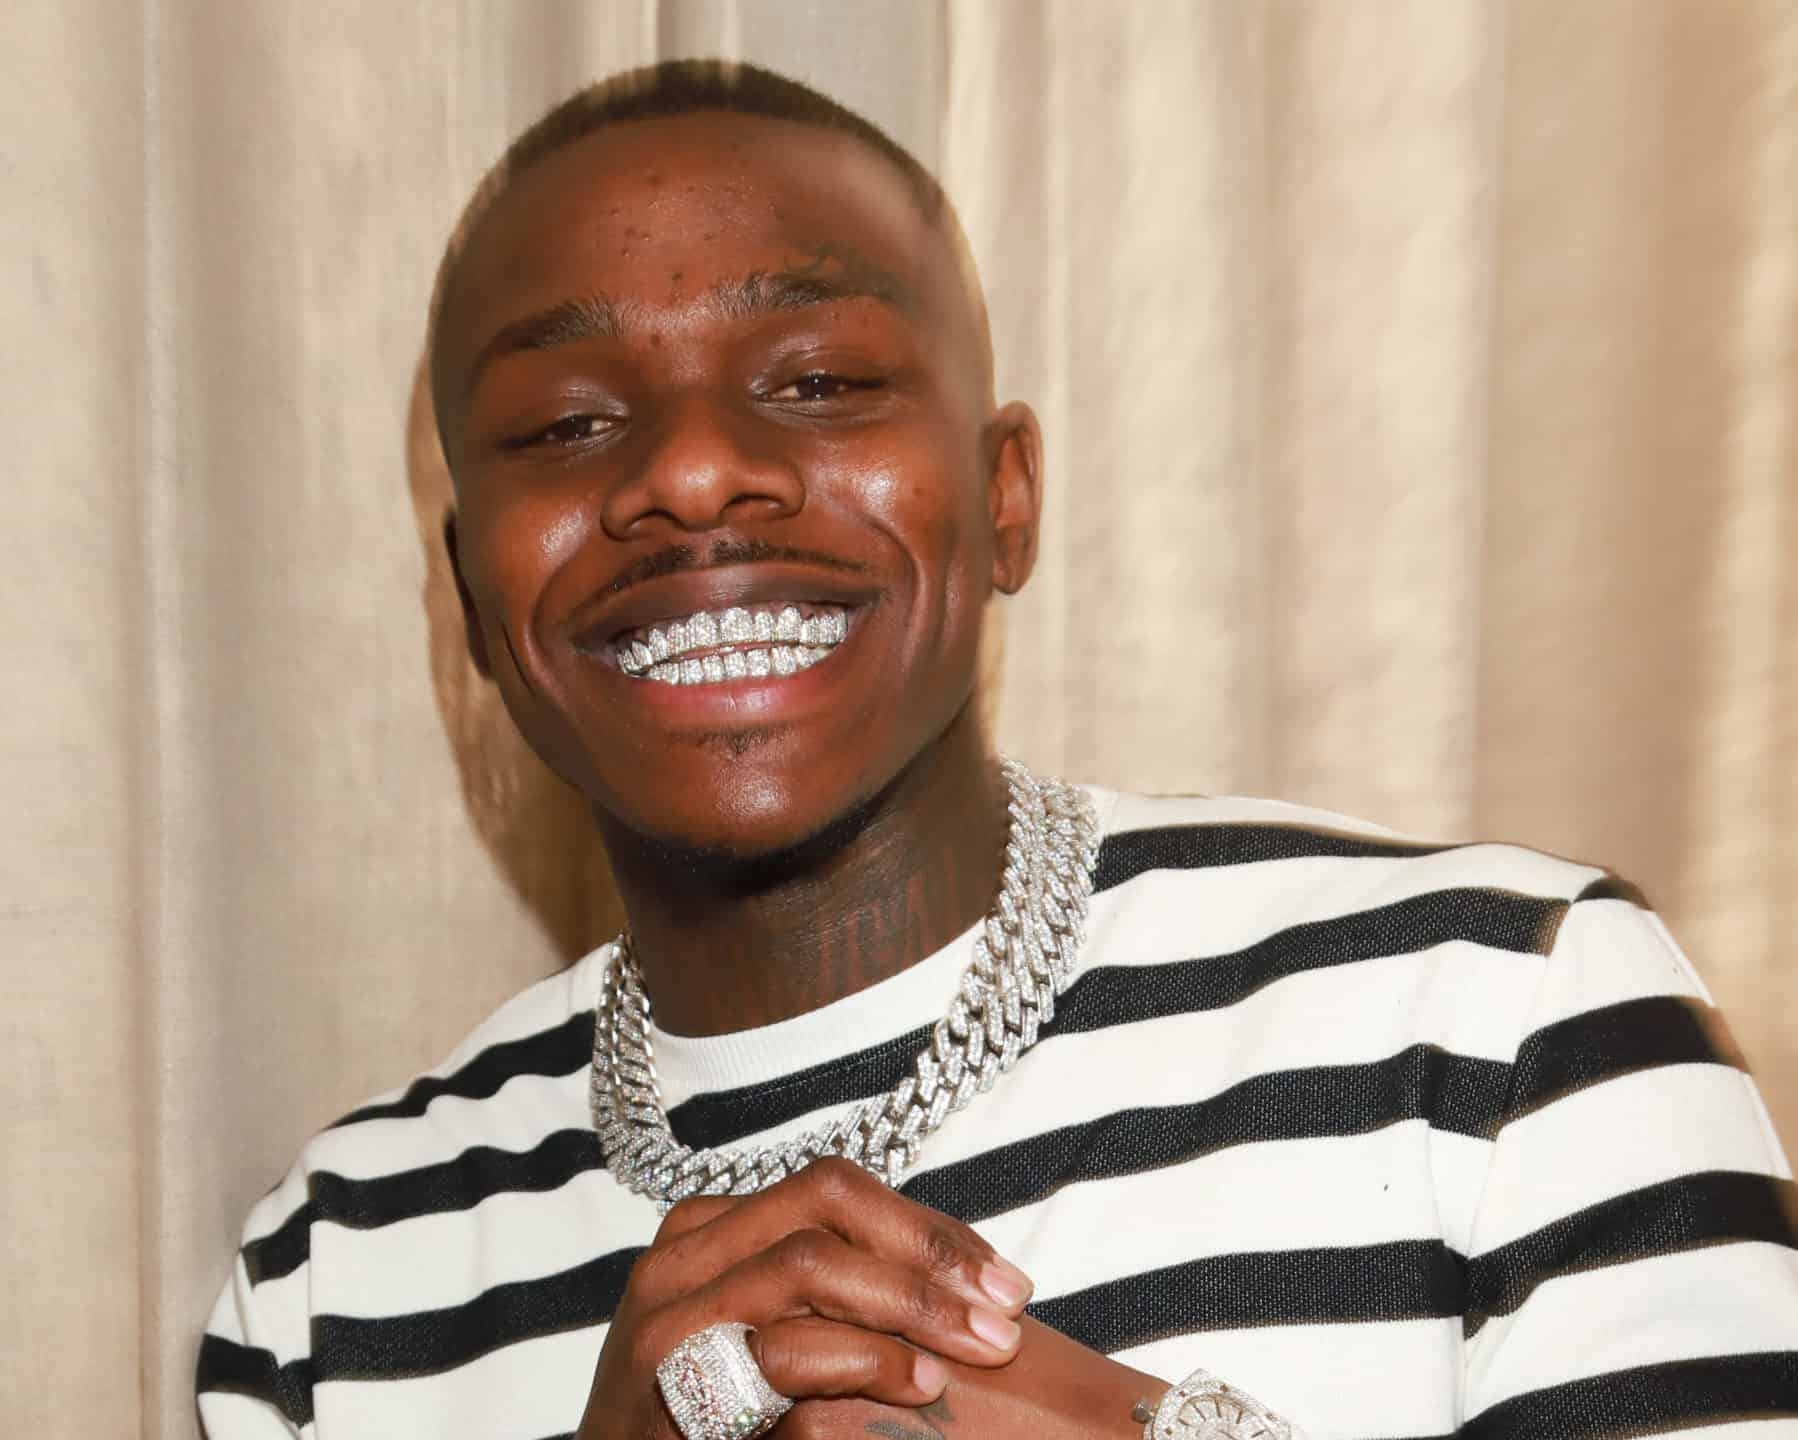 DaBaby Accused Of Allegedly Knocking Rental Property Owner’s Tooth Out In Confrontation Over Unauthorized Music Video